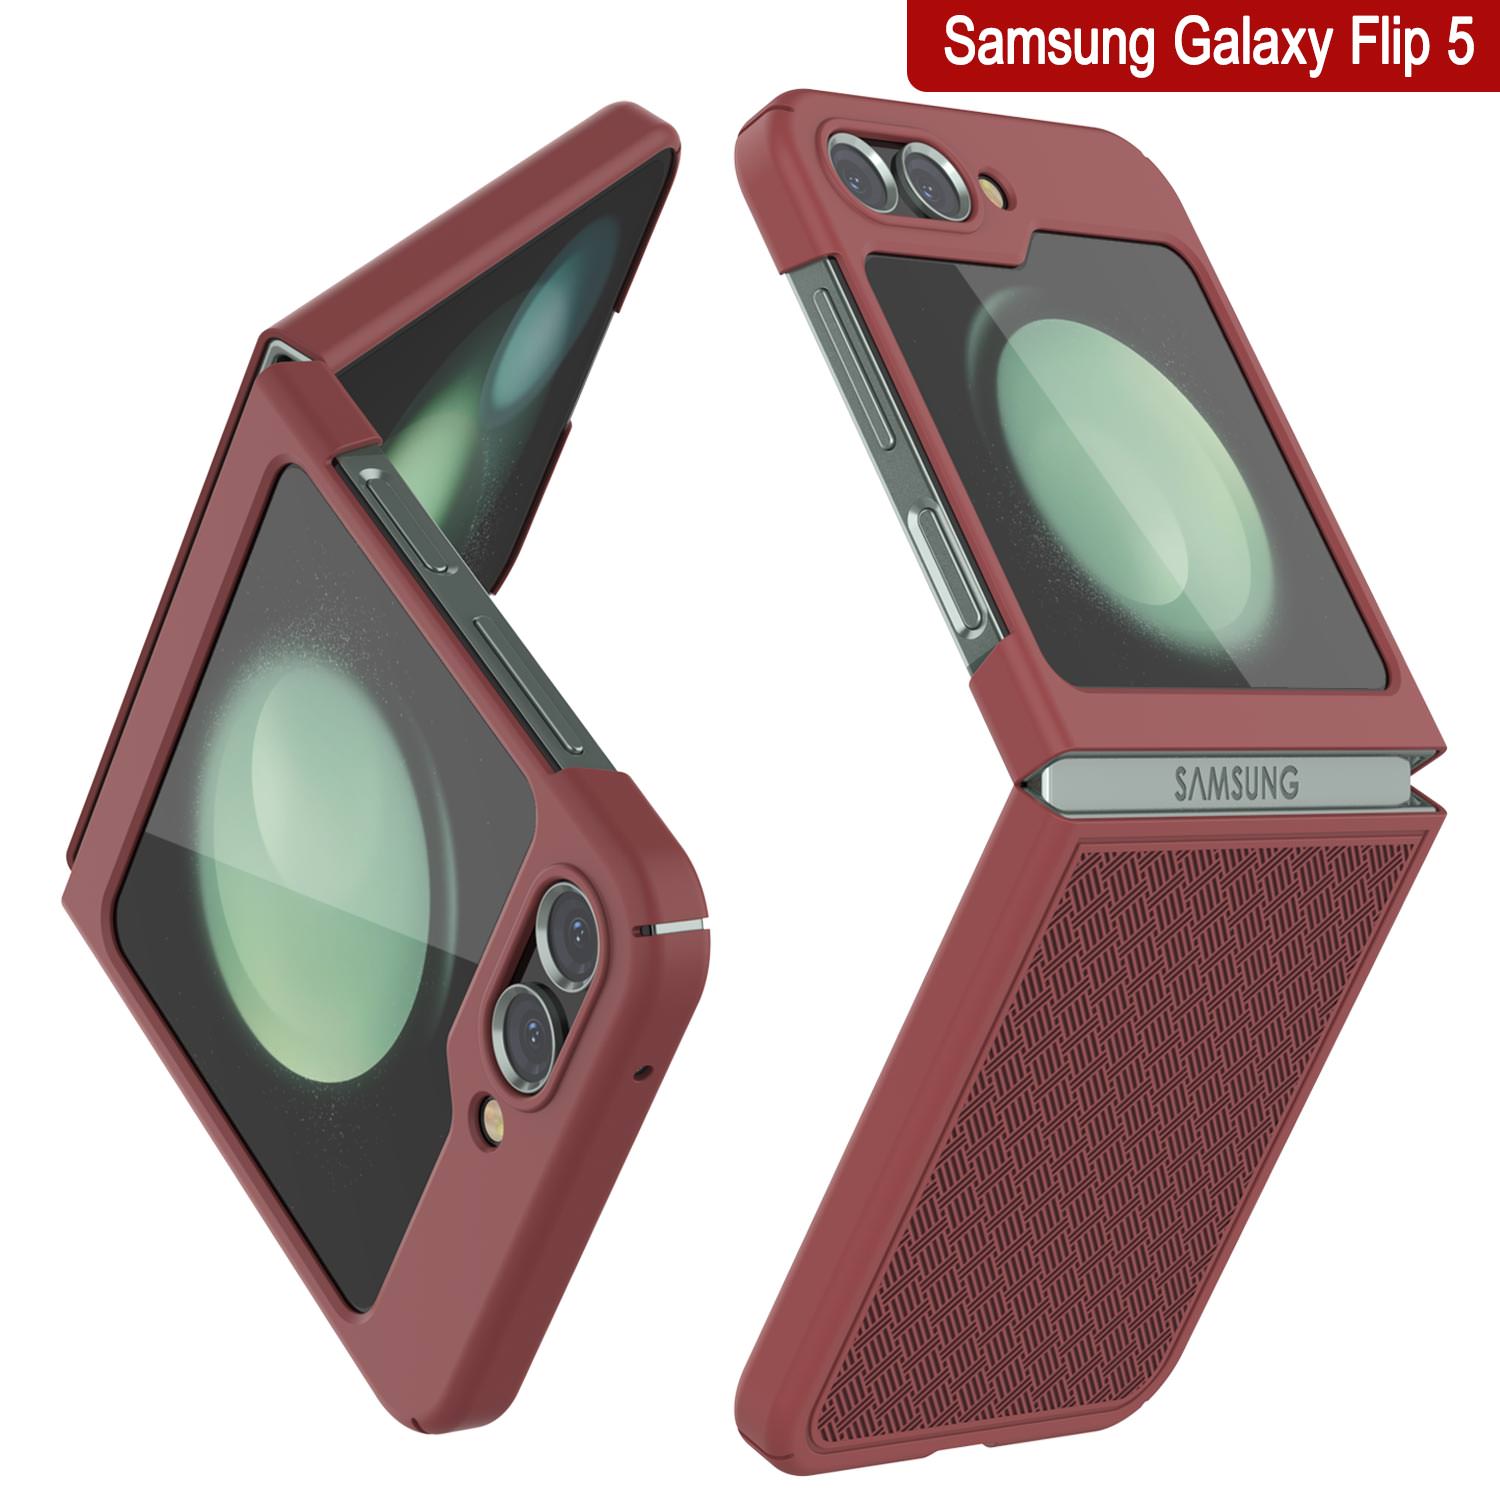 Galaxy Z Flip5 Case With Tempered Glass Screen Protector, Holster Belt Clip & Built-In Kickstand [Red]